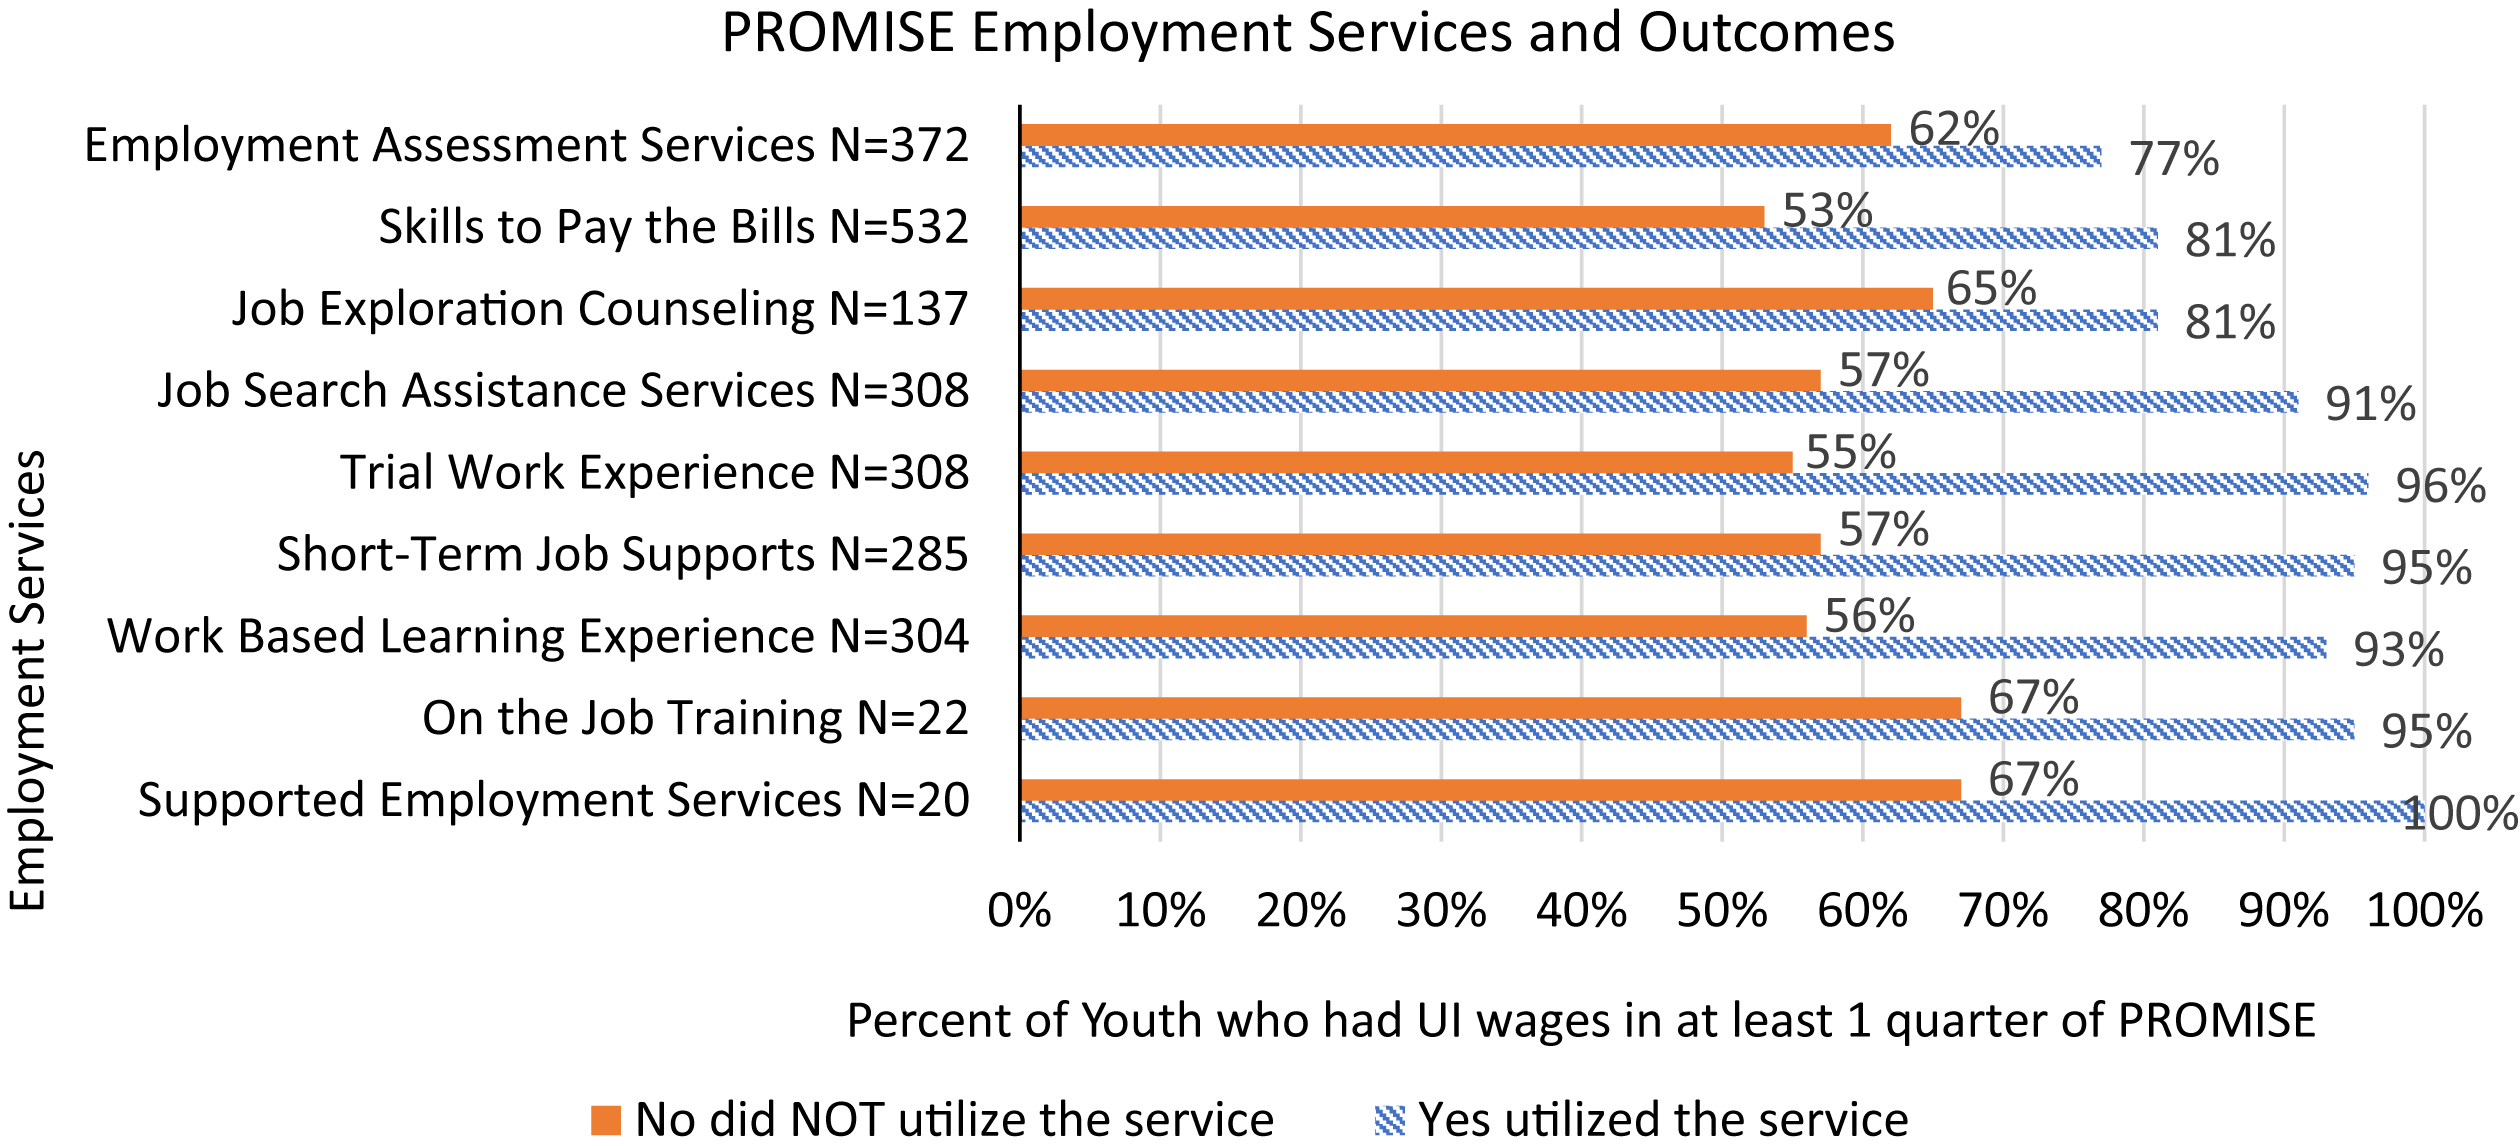 Employment Service Impact on Employment Outcomes Figure Caption. Percent of PROMISE youth who had a job following the receipt of a DVR employment service. N is the count of PROMISE youth who received the service. The number of youth who did not receive the service can be calculated by subtracting 1011 – N.